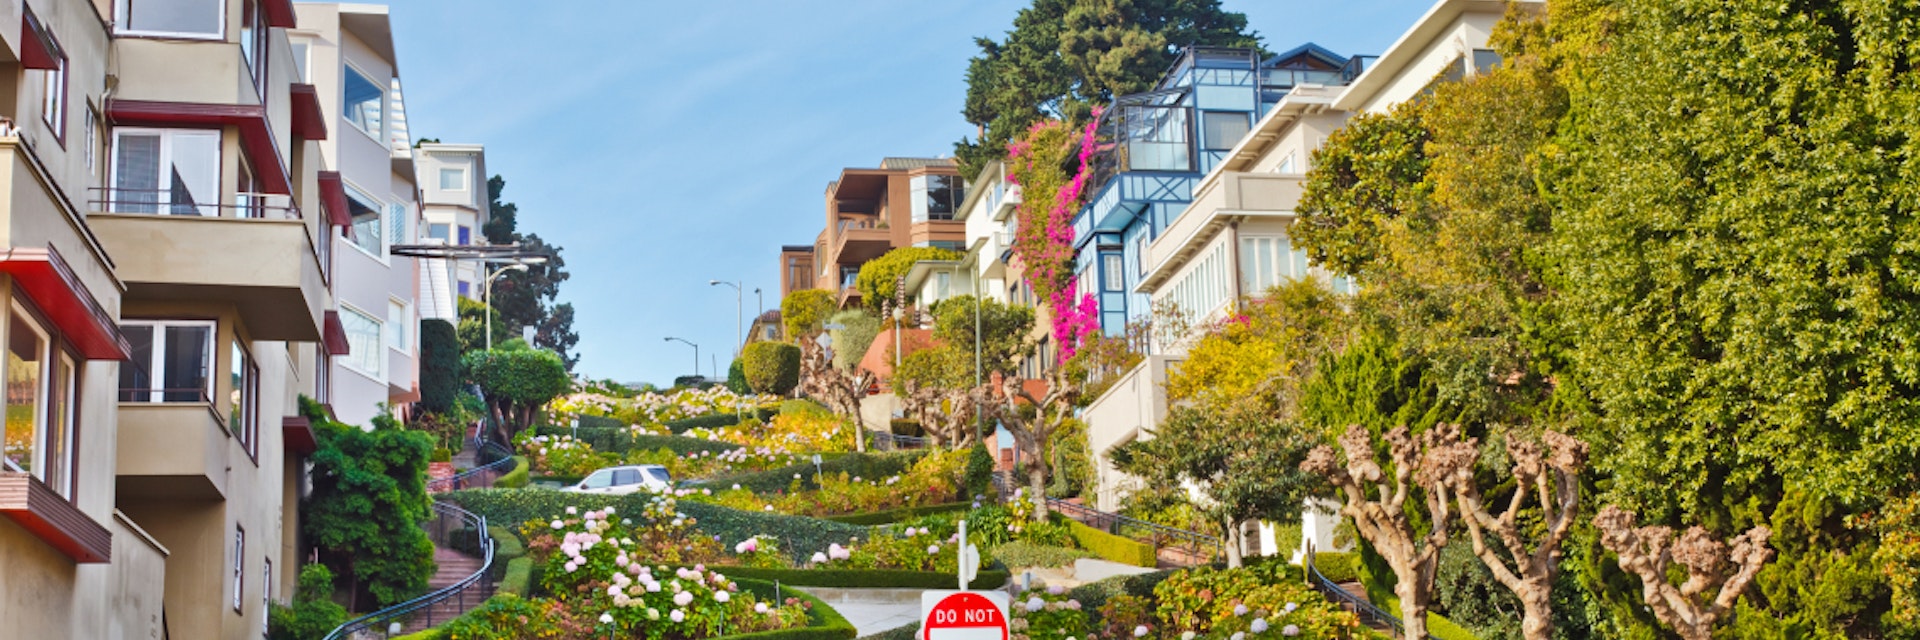 Lombard Street in San Francisco; Shutterstock ID 80832514; Your name (First / Last): Clifton Wilkinson; GL account no.: 65050; Netsuite department name: Online Editorial; Full Product or Project name including edition: Mobile App images